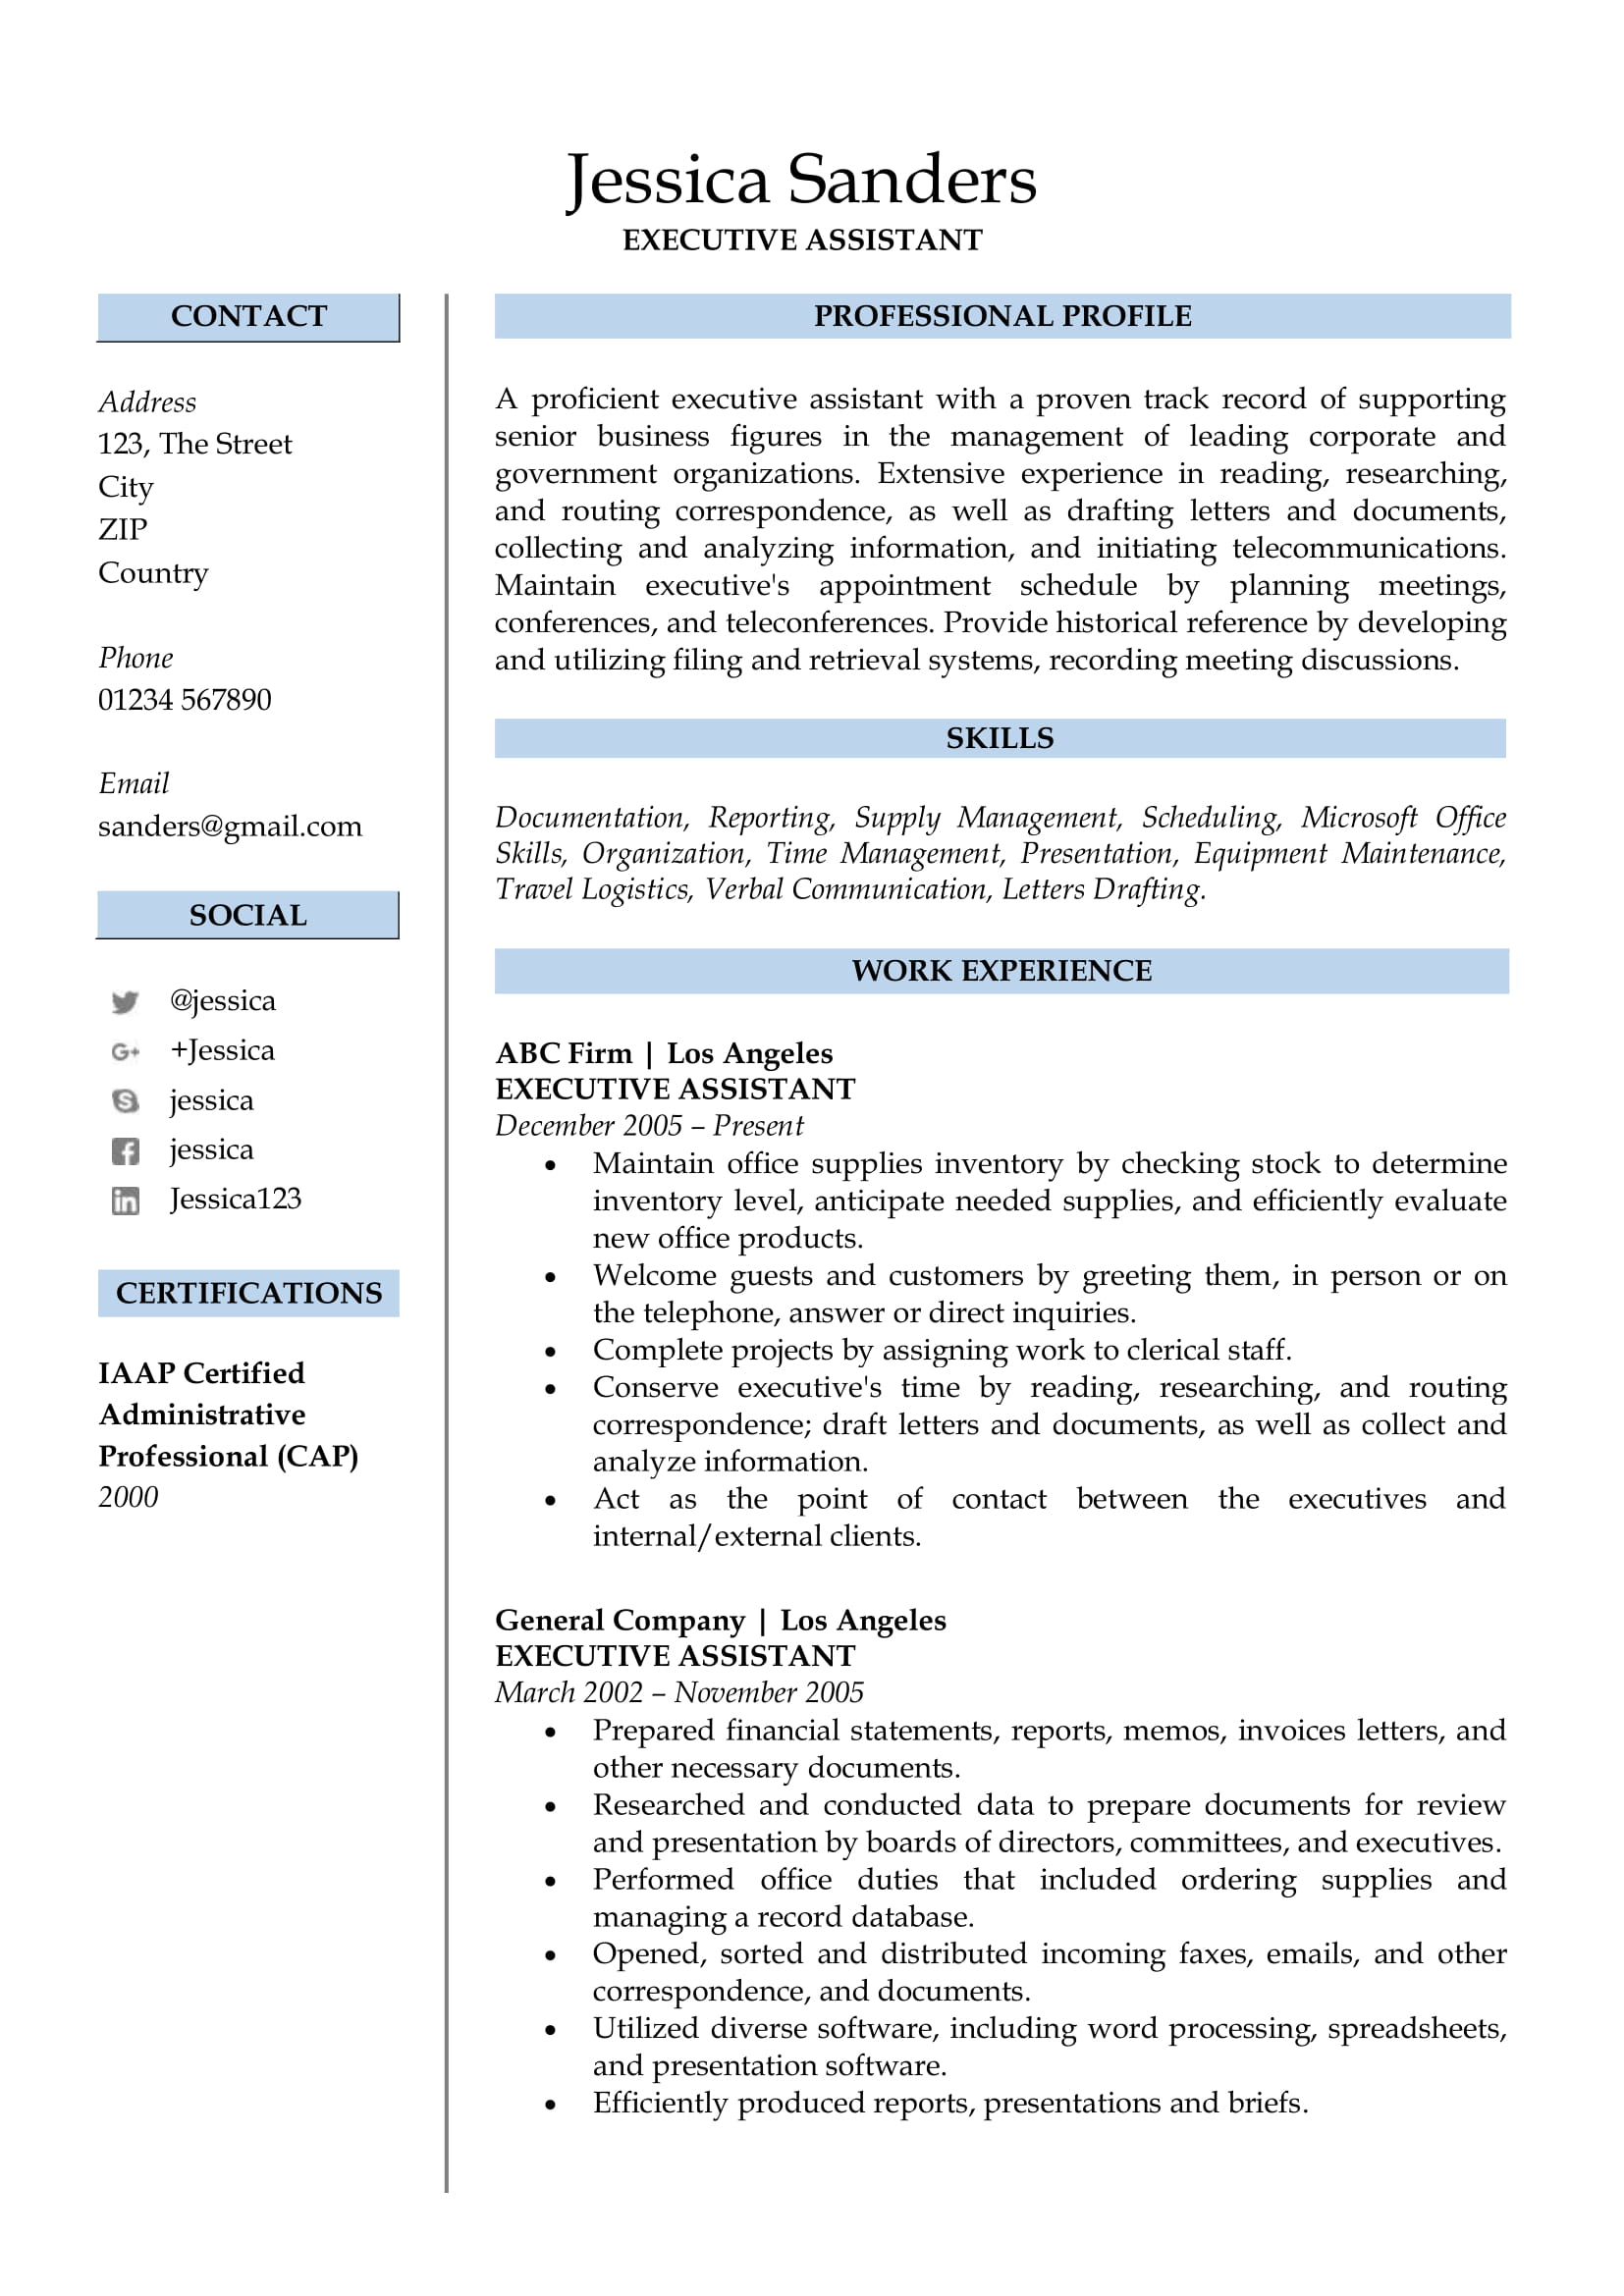 Resume writing services science